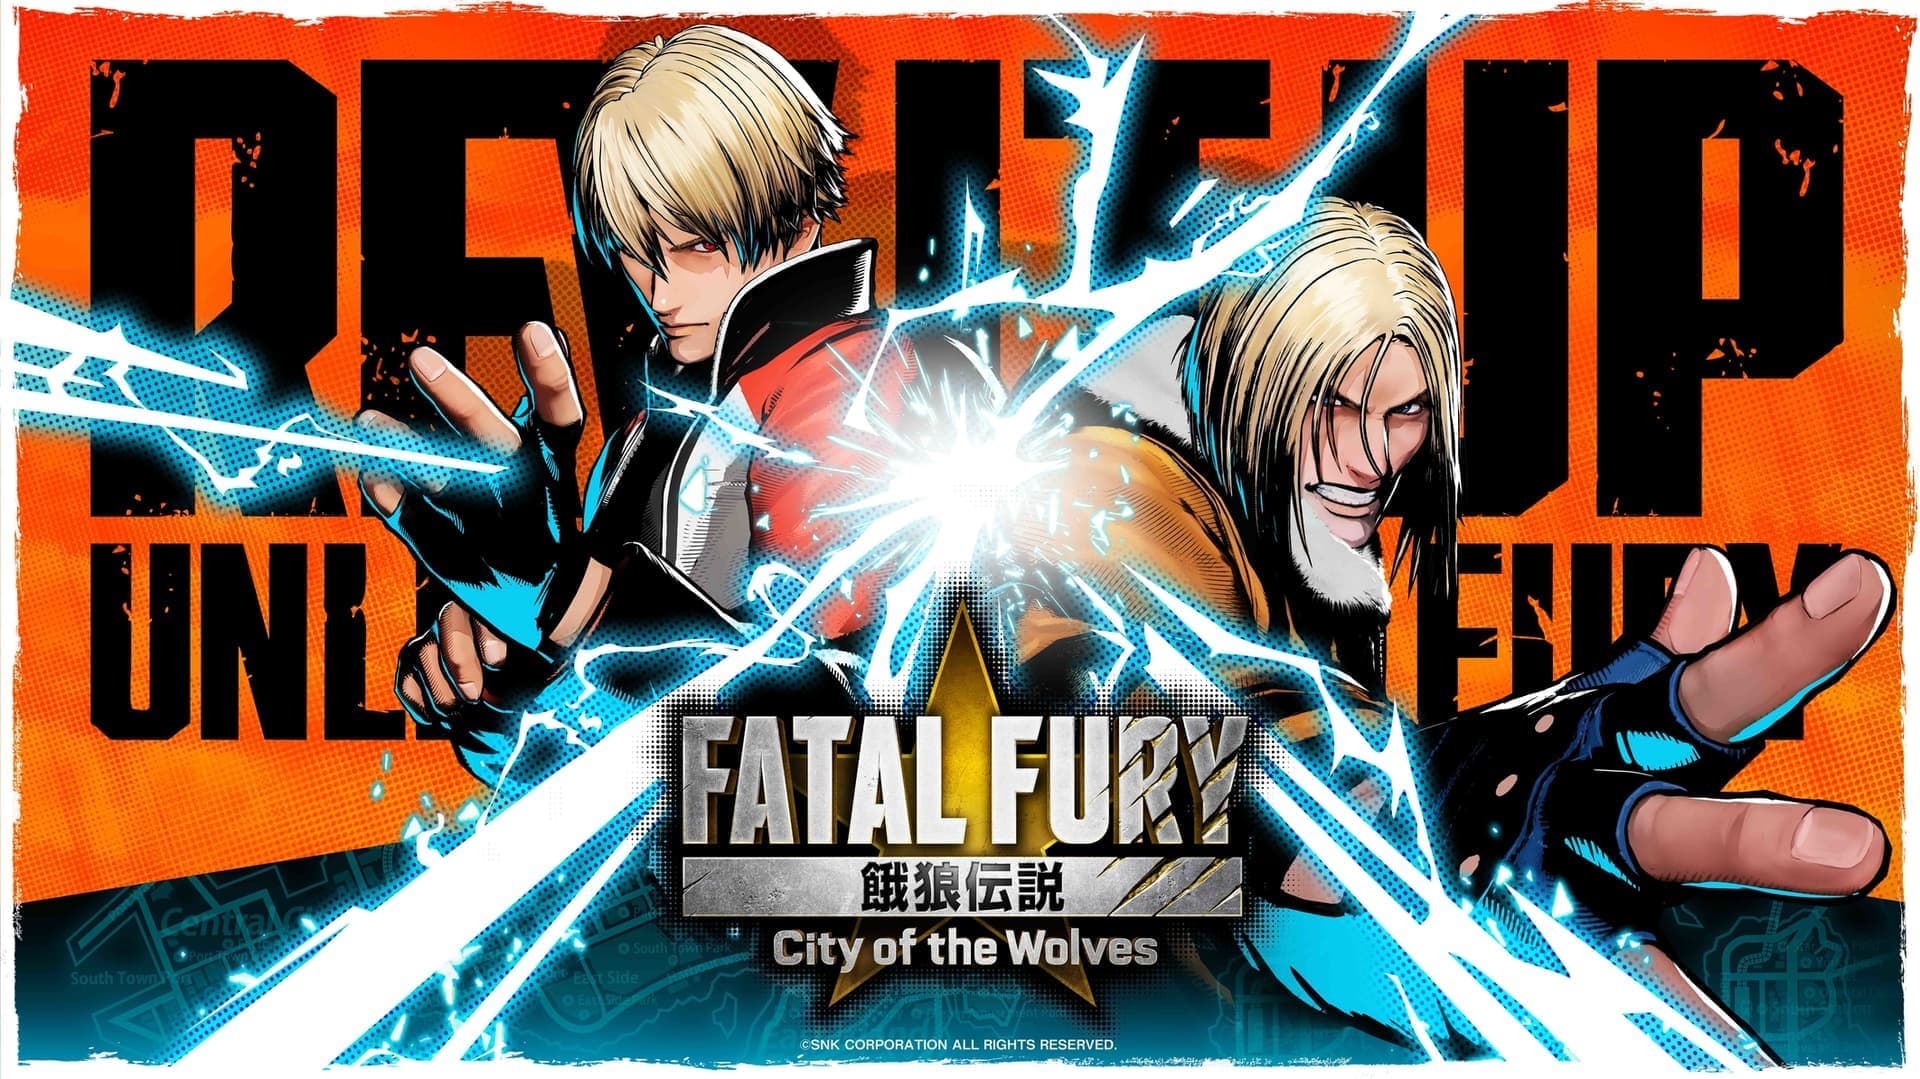 “Fatal Fury City of the Wolves” first trial will be held at EVO Japan_005